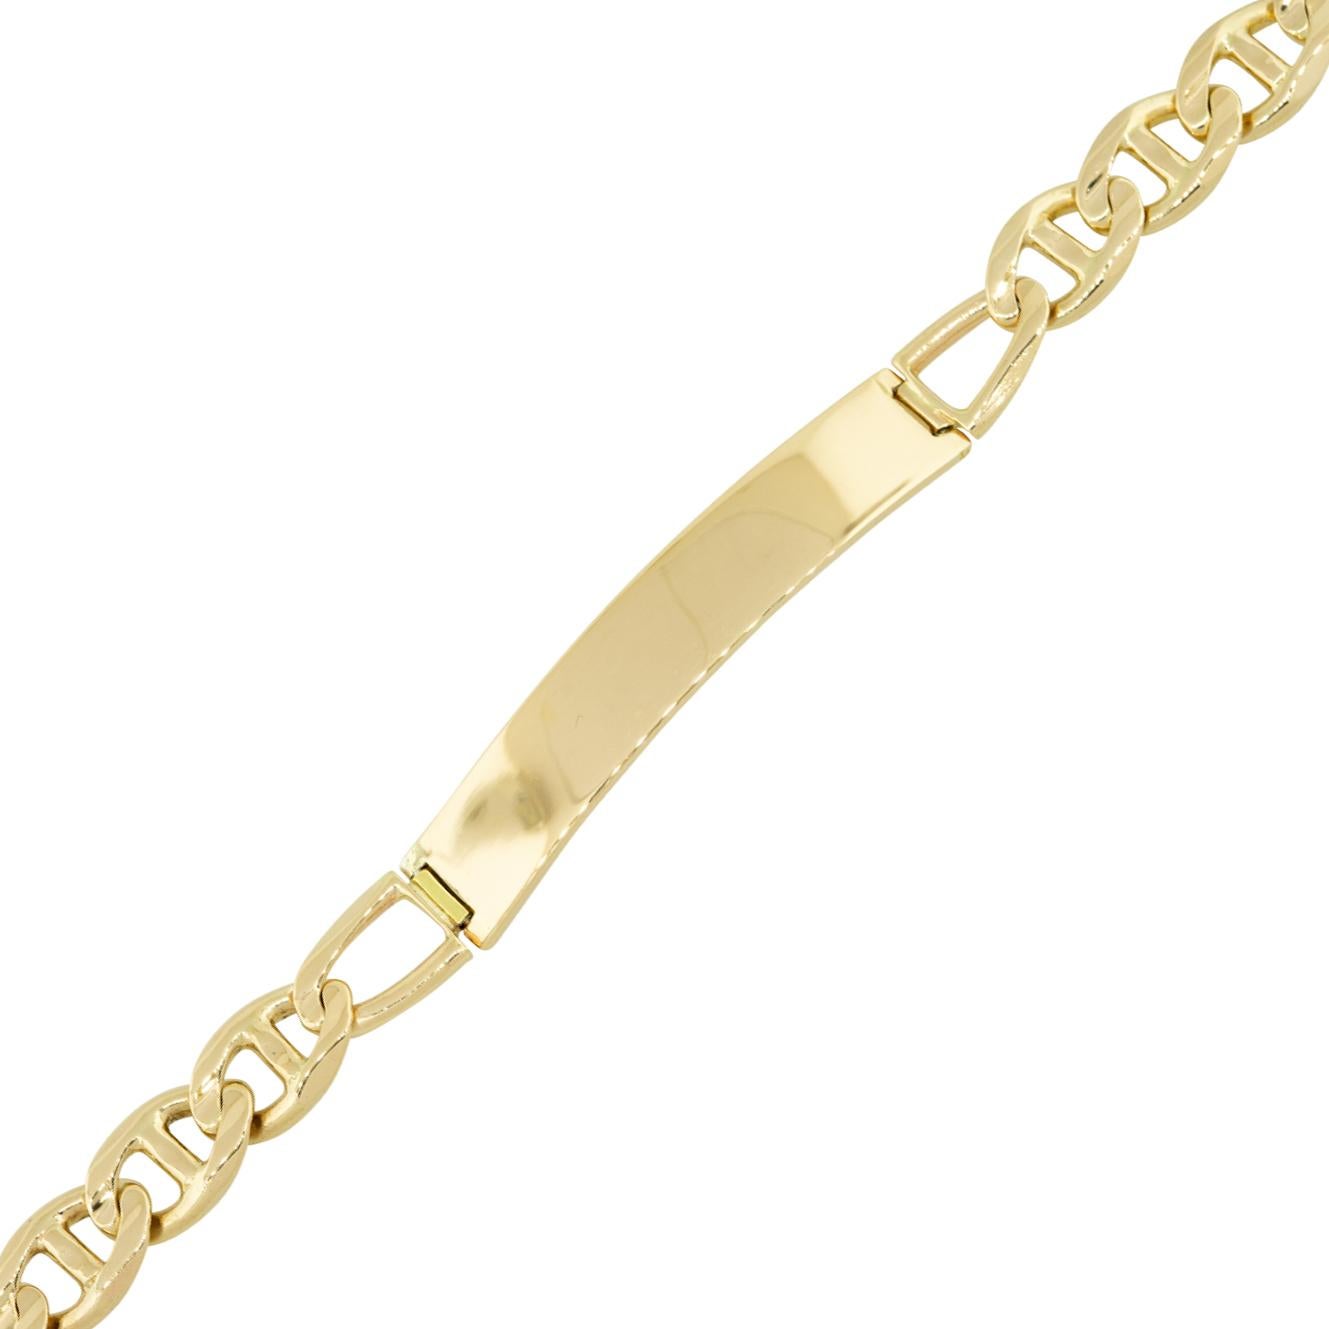 14k Yellow Gold Men's 8mm Link Chain ID Plate Bracelet
Material: 14k Yellow Gold
ID Plate Details: ID plate measures approximately 1.5